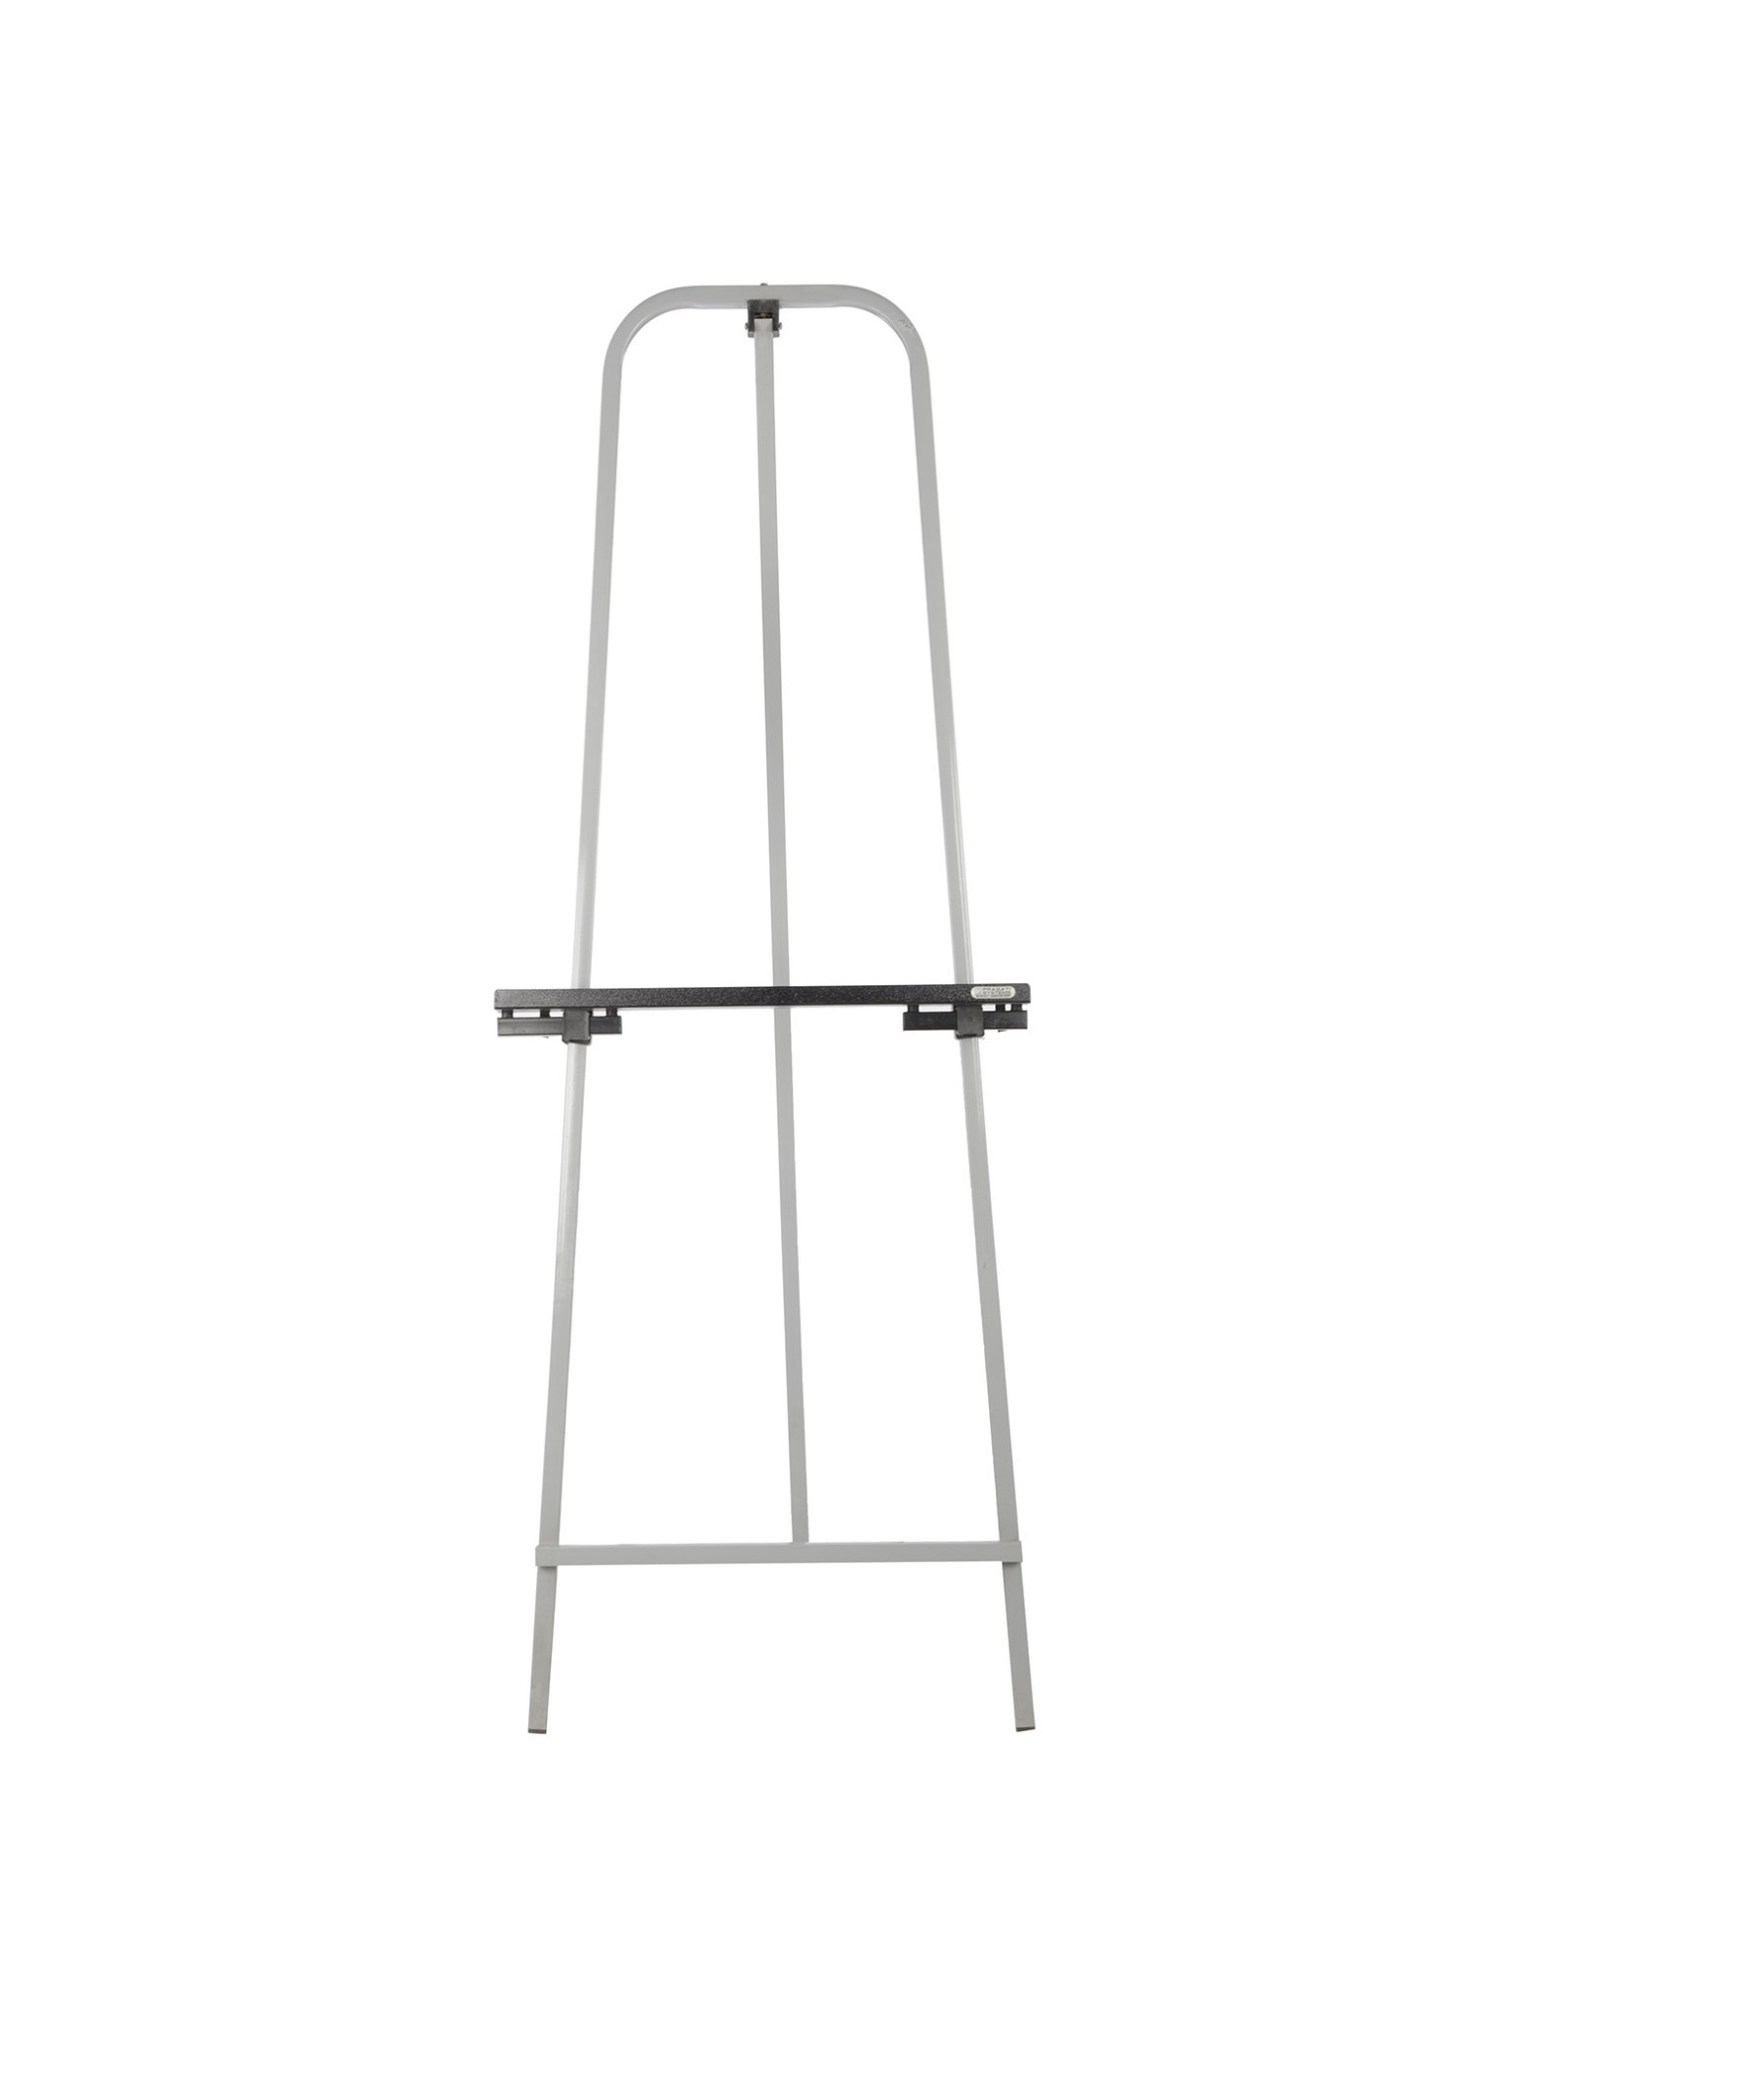 Lightweight Steel Easel, Fixed-Type Stand For Presentation, Display And Painting